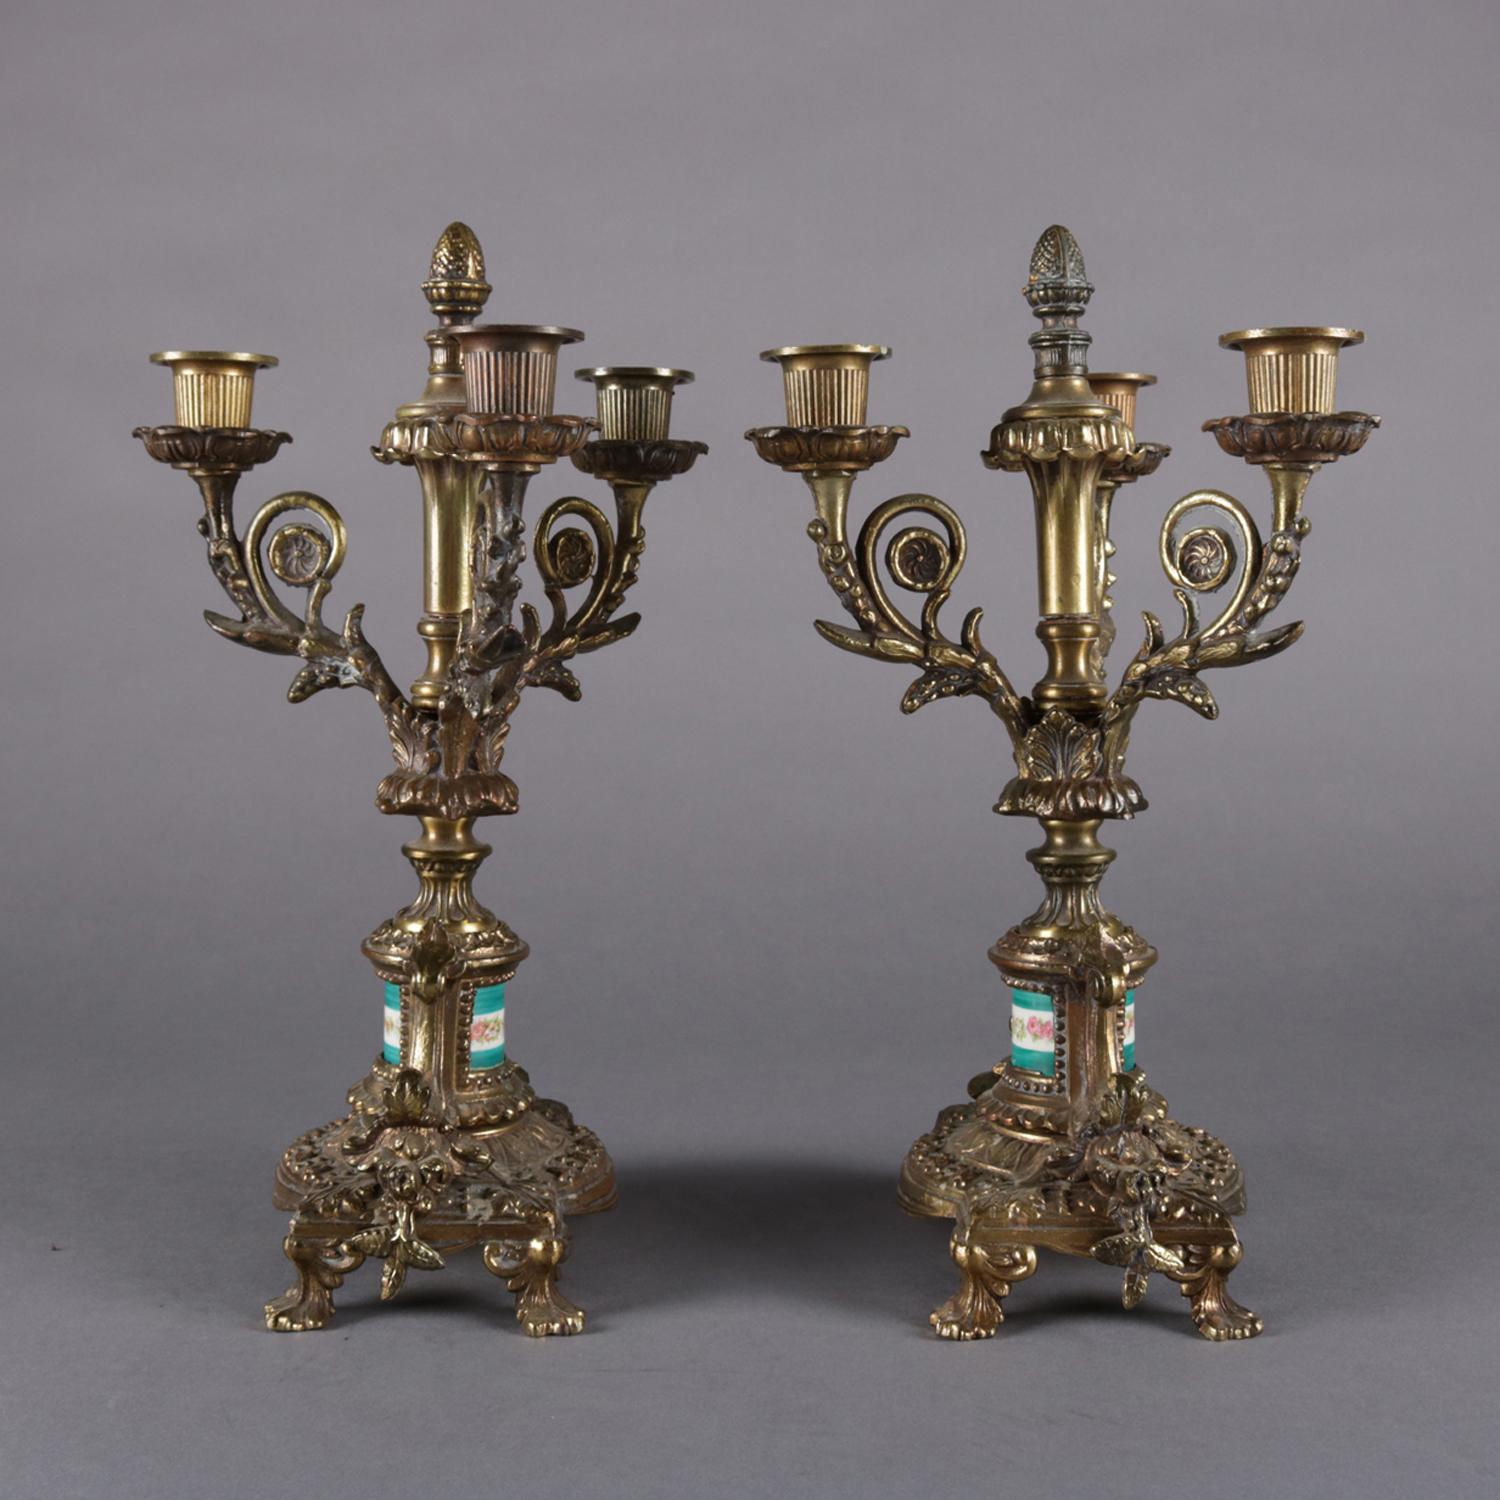 20th Century French Louis XIV Style Bronzed Candelabra with Sevres School Porcelain